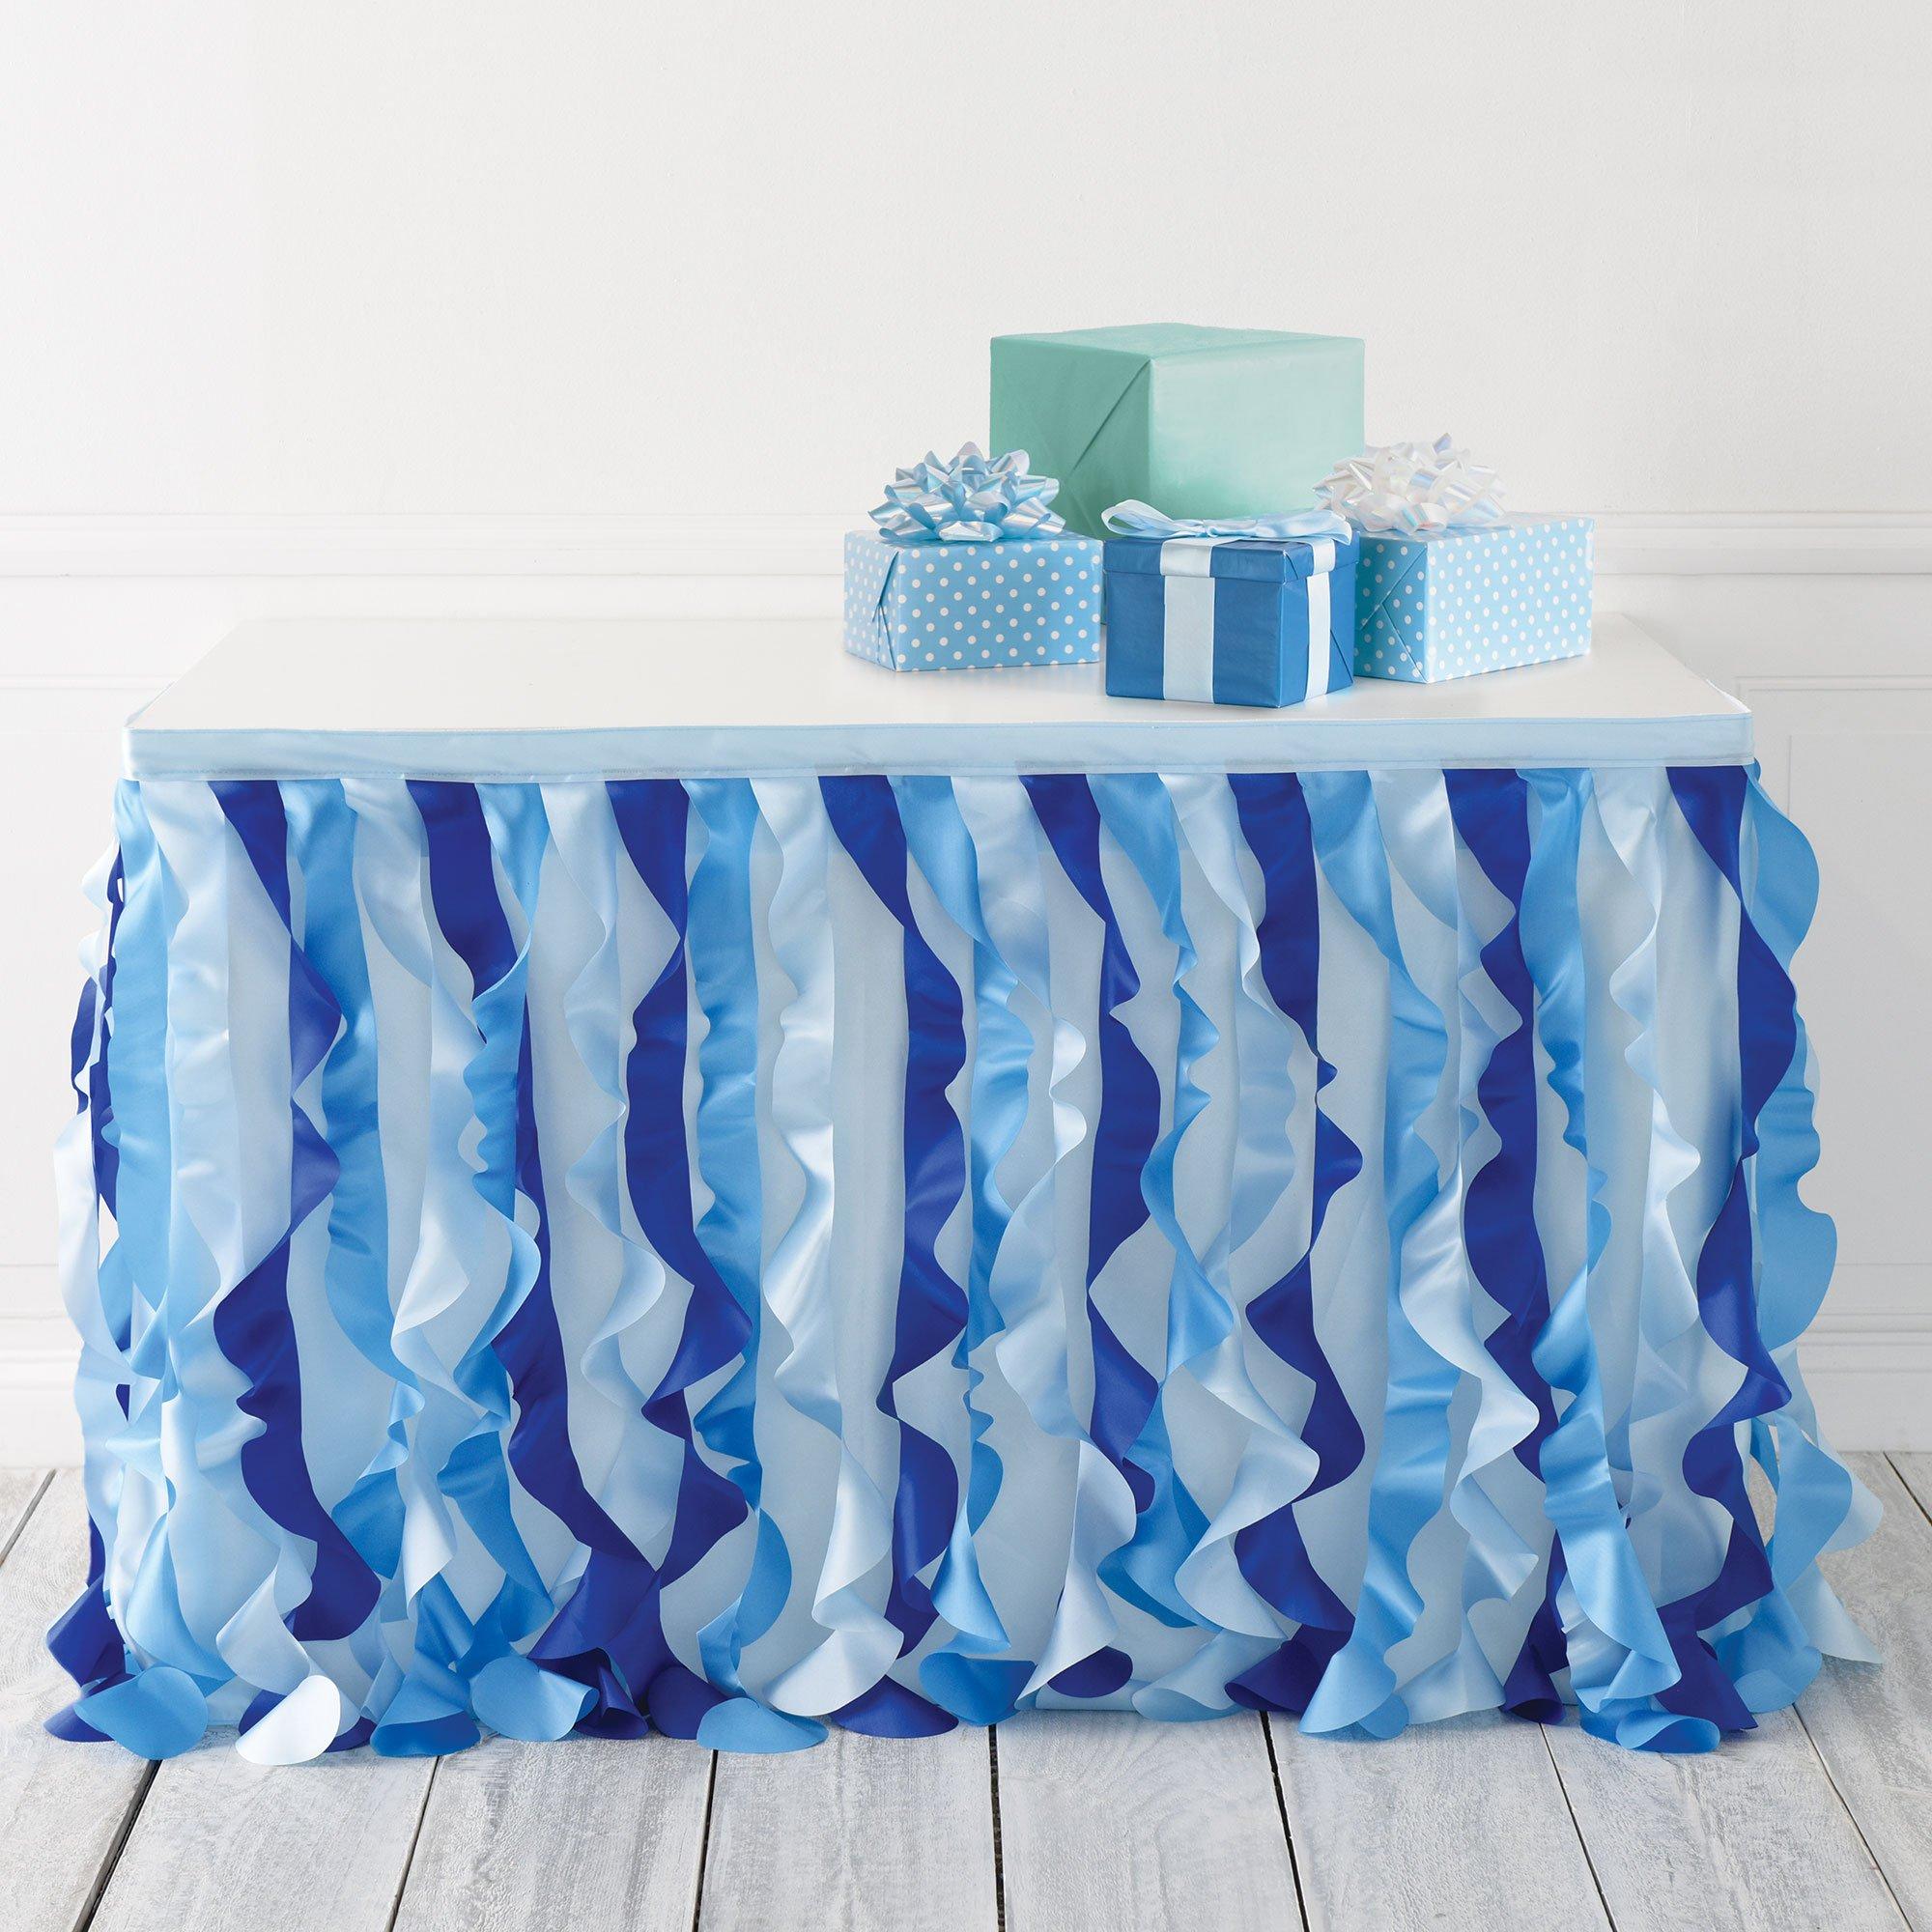 Fabric Ruffle Table Skirt, 30in x 72in - Oh Baby!